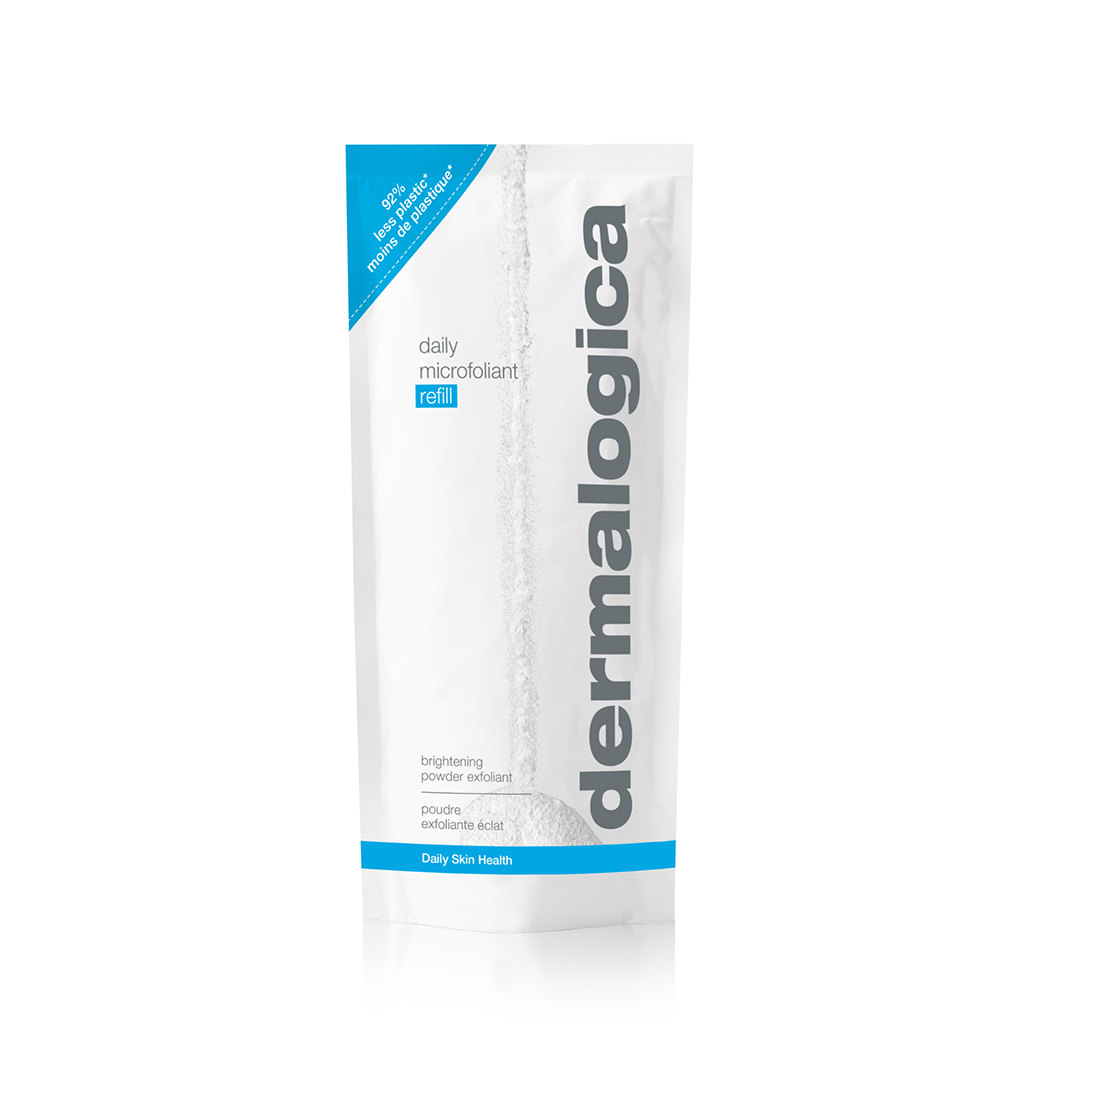 Daily Microfoliant Refill Pouch (74g)